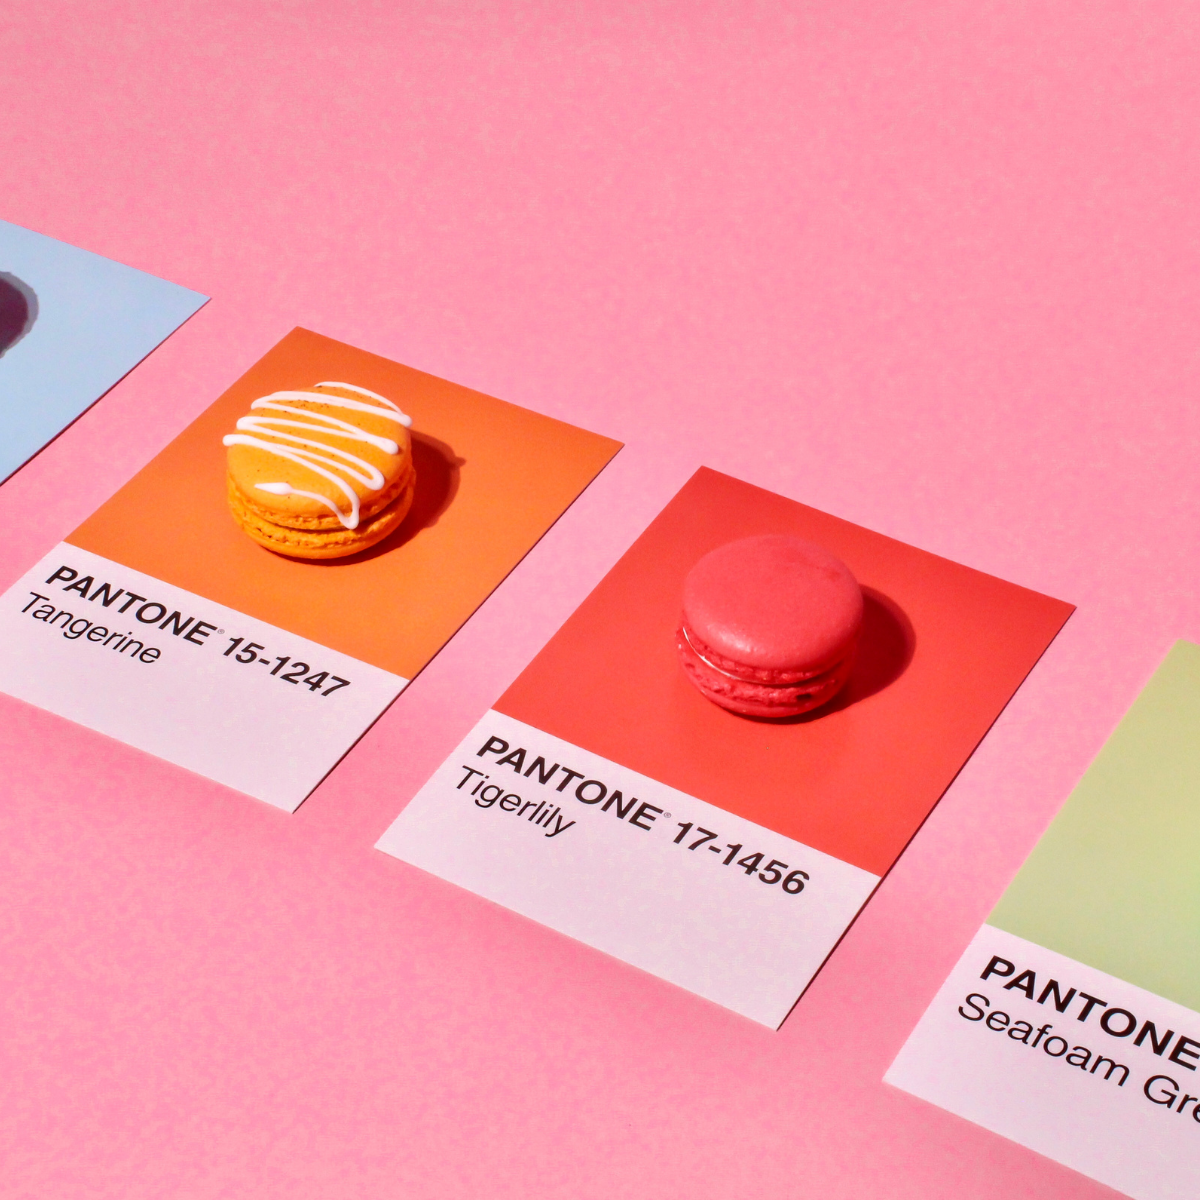 Over 10,000 Pantone Colours, What For?